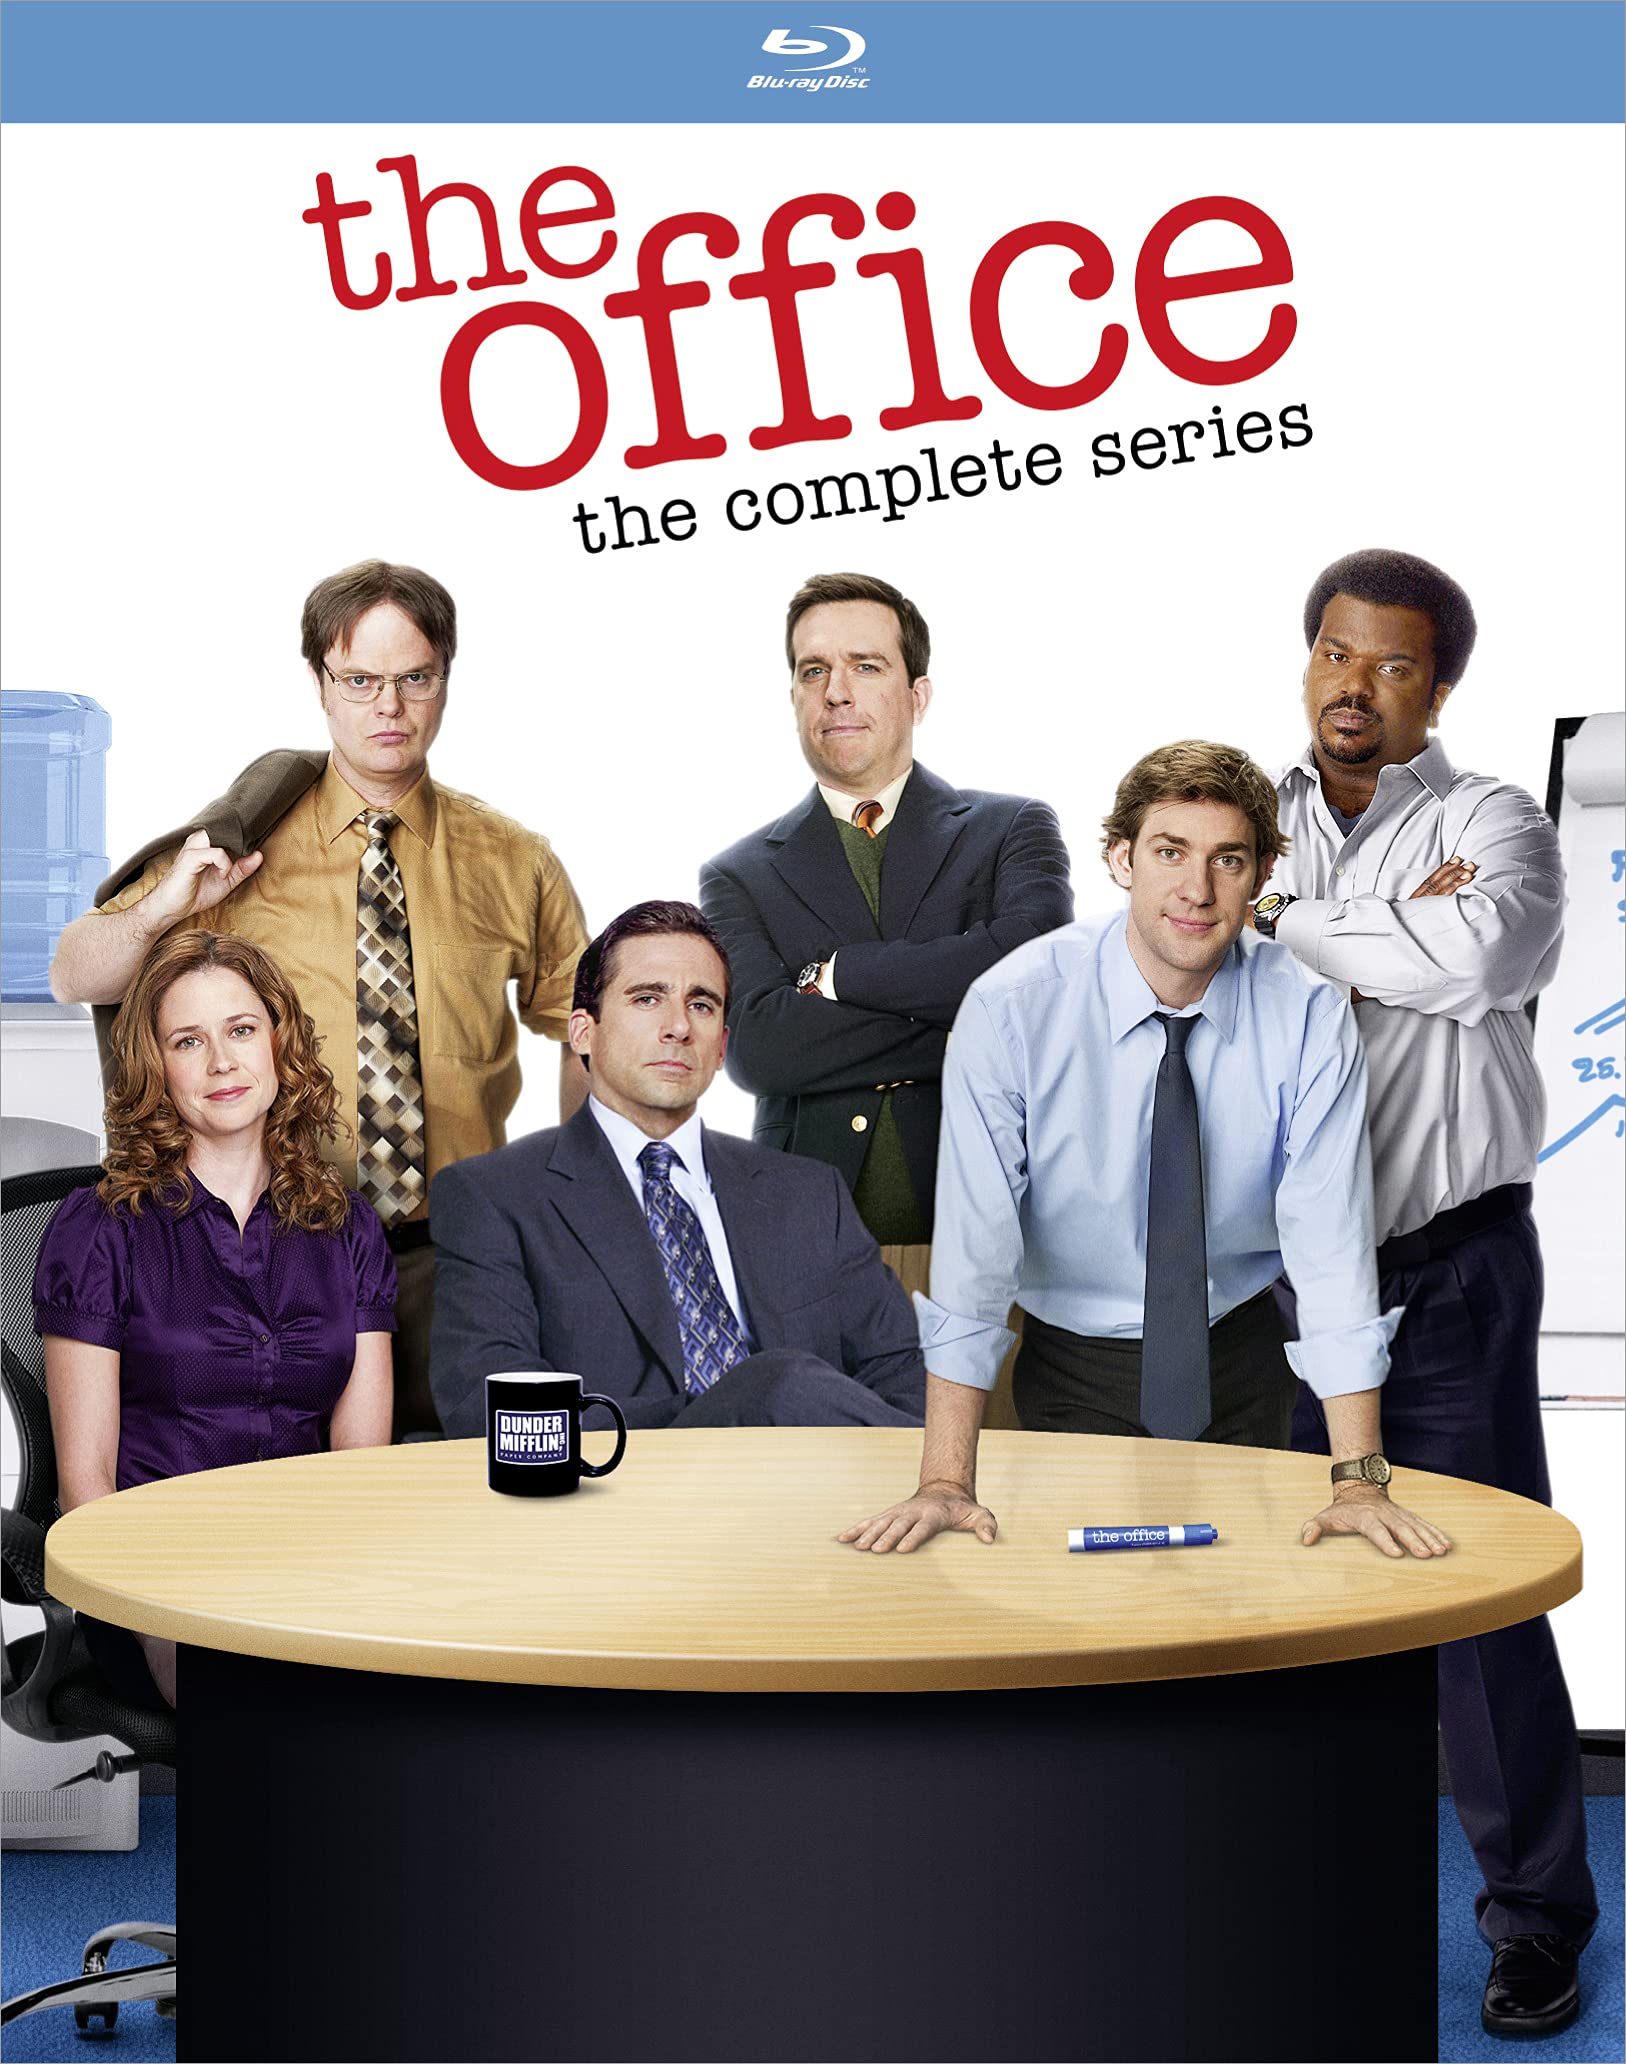 The Office: The Complete Series (Blu-ray)